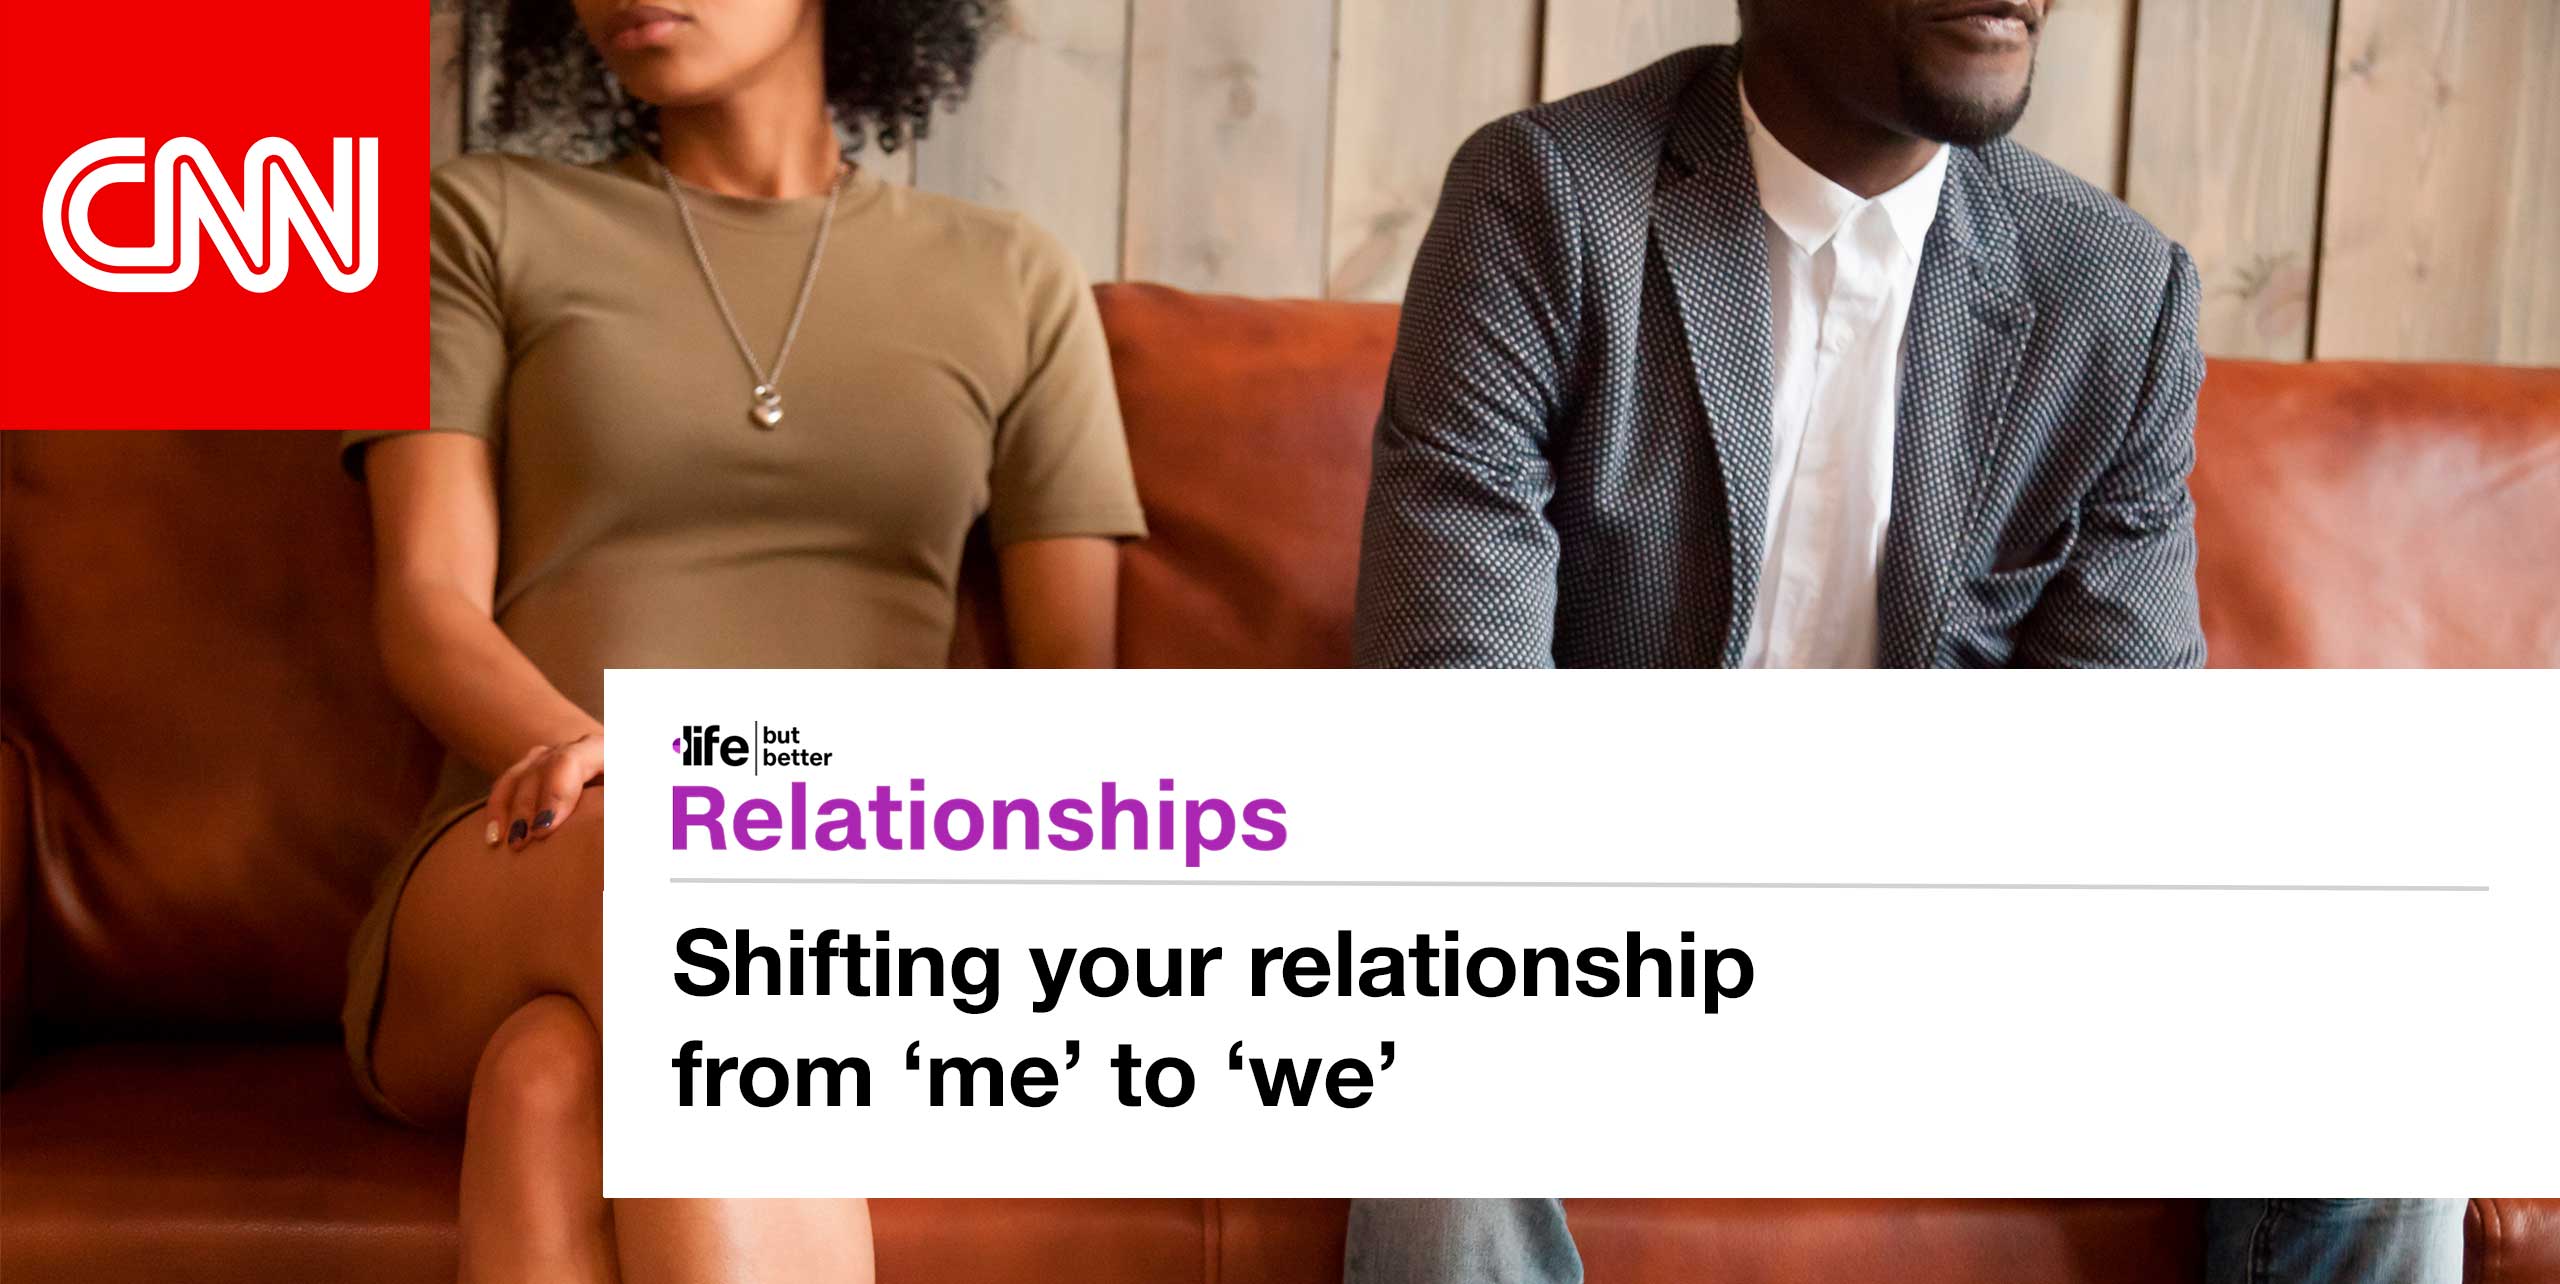 CNN logo and photo of couple on couch turning slightly away from one another. CNN tagline: life but better. Section: Relationships Headline: Shifting your relationship from me to we